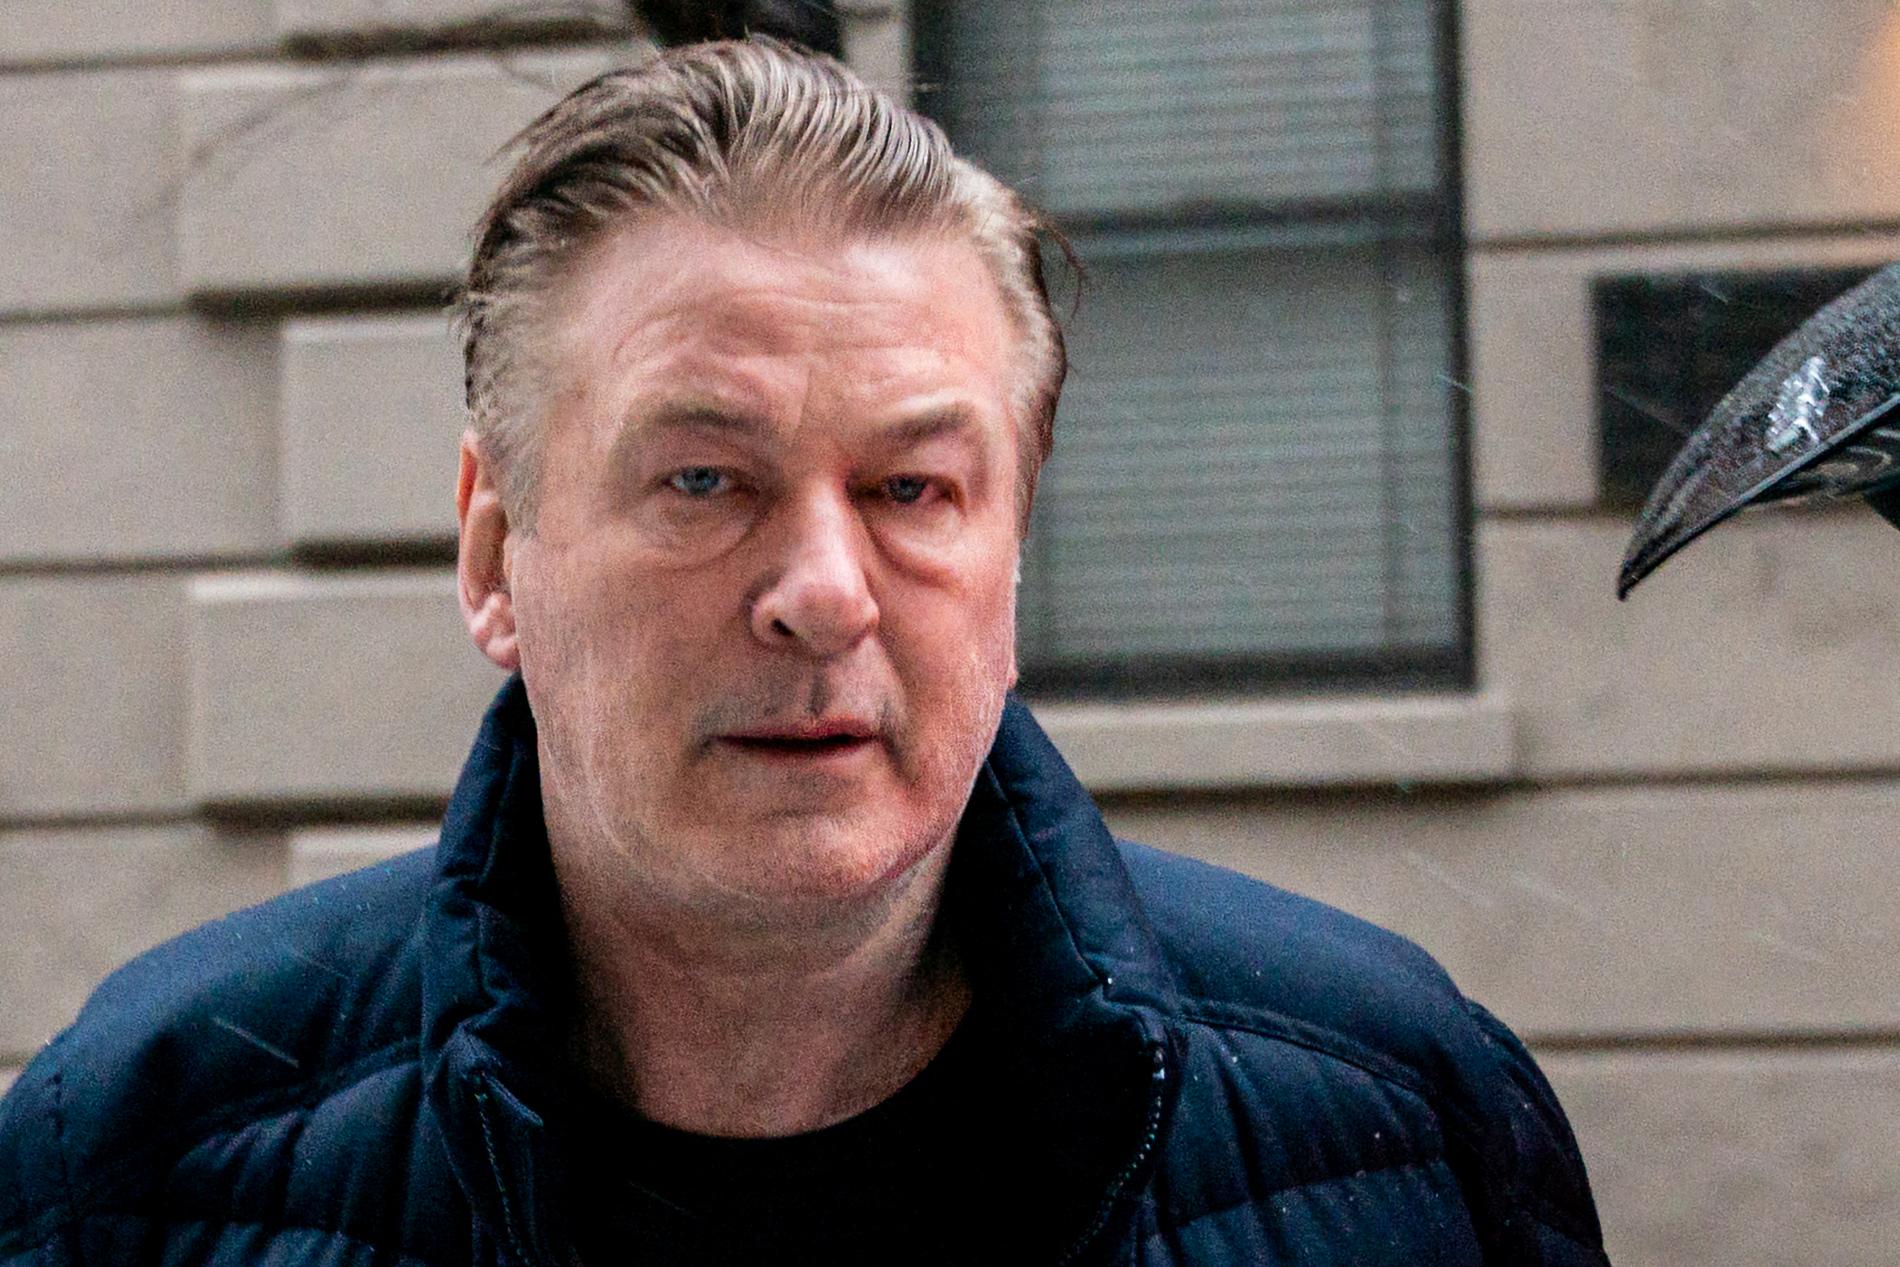 Alec Baldwin charged with negligent homicide: pleads not guilty in 'Rust' case